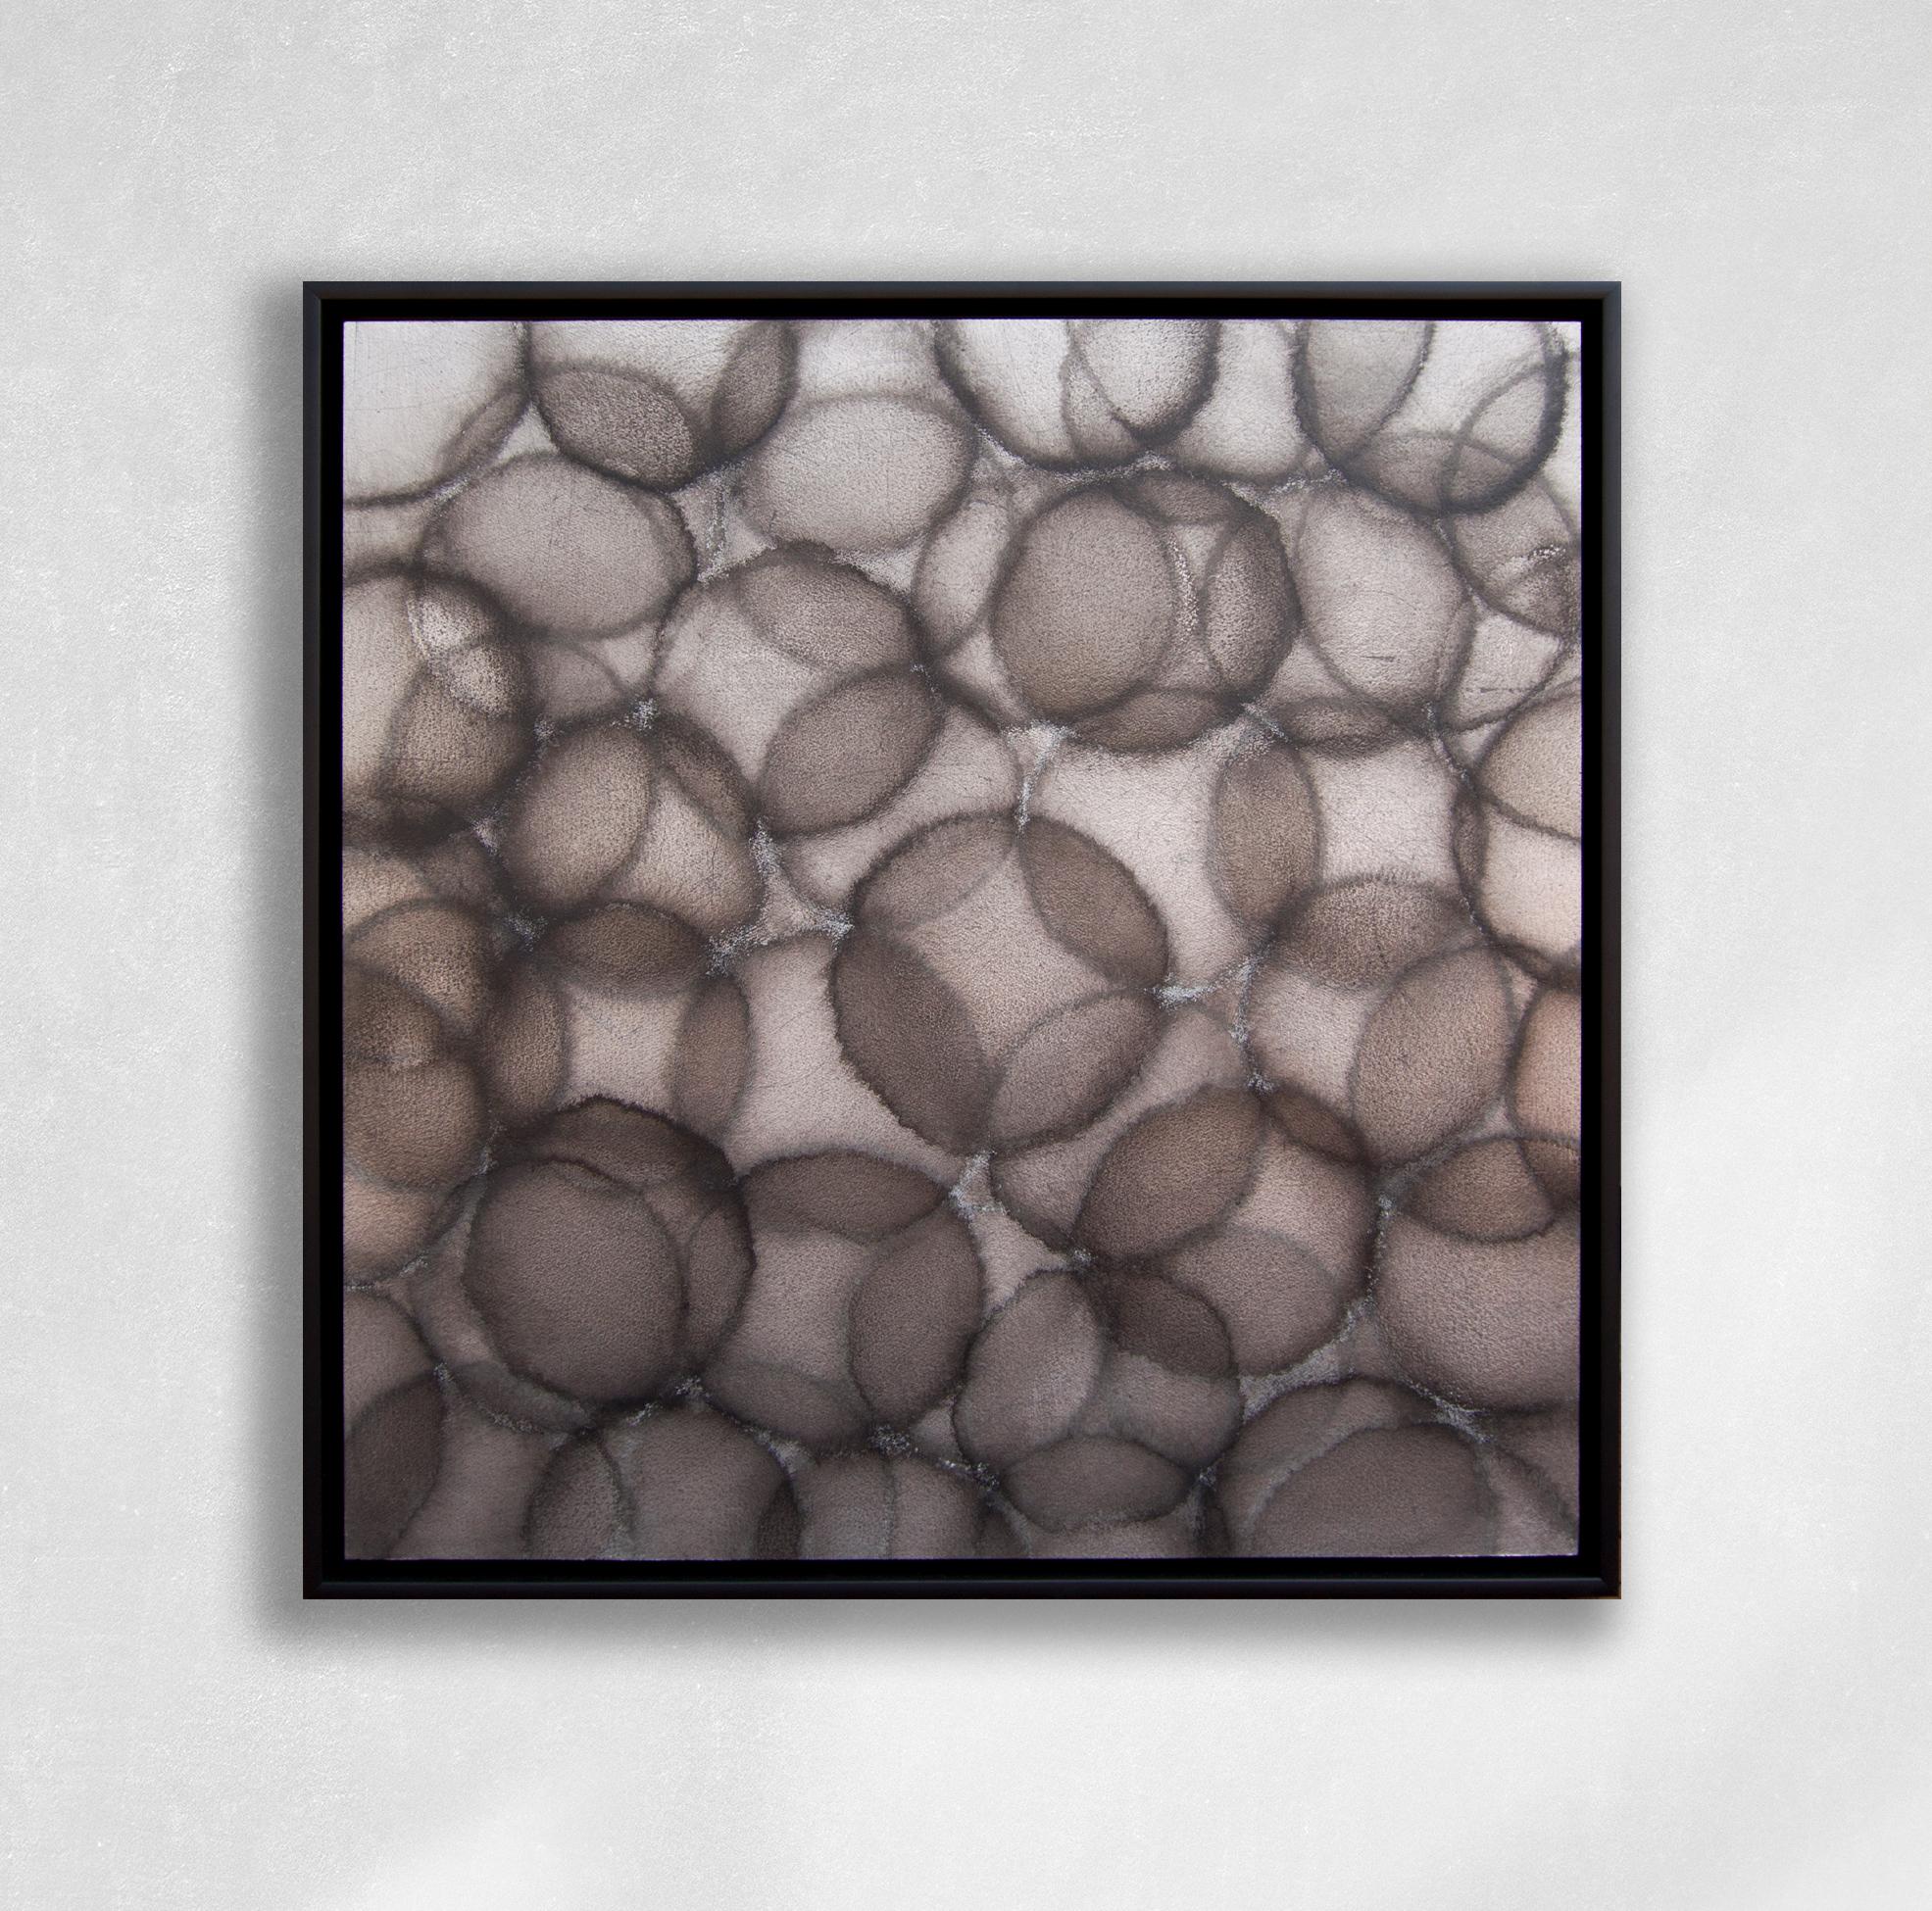 This abstract painting is made with acrylic paint over metal leaf on cradled panel. It features a charcoal grey palette, with translucent circular shapes layered over one another creating darker shapes where the circles overlap. The painting itself